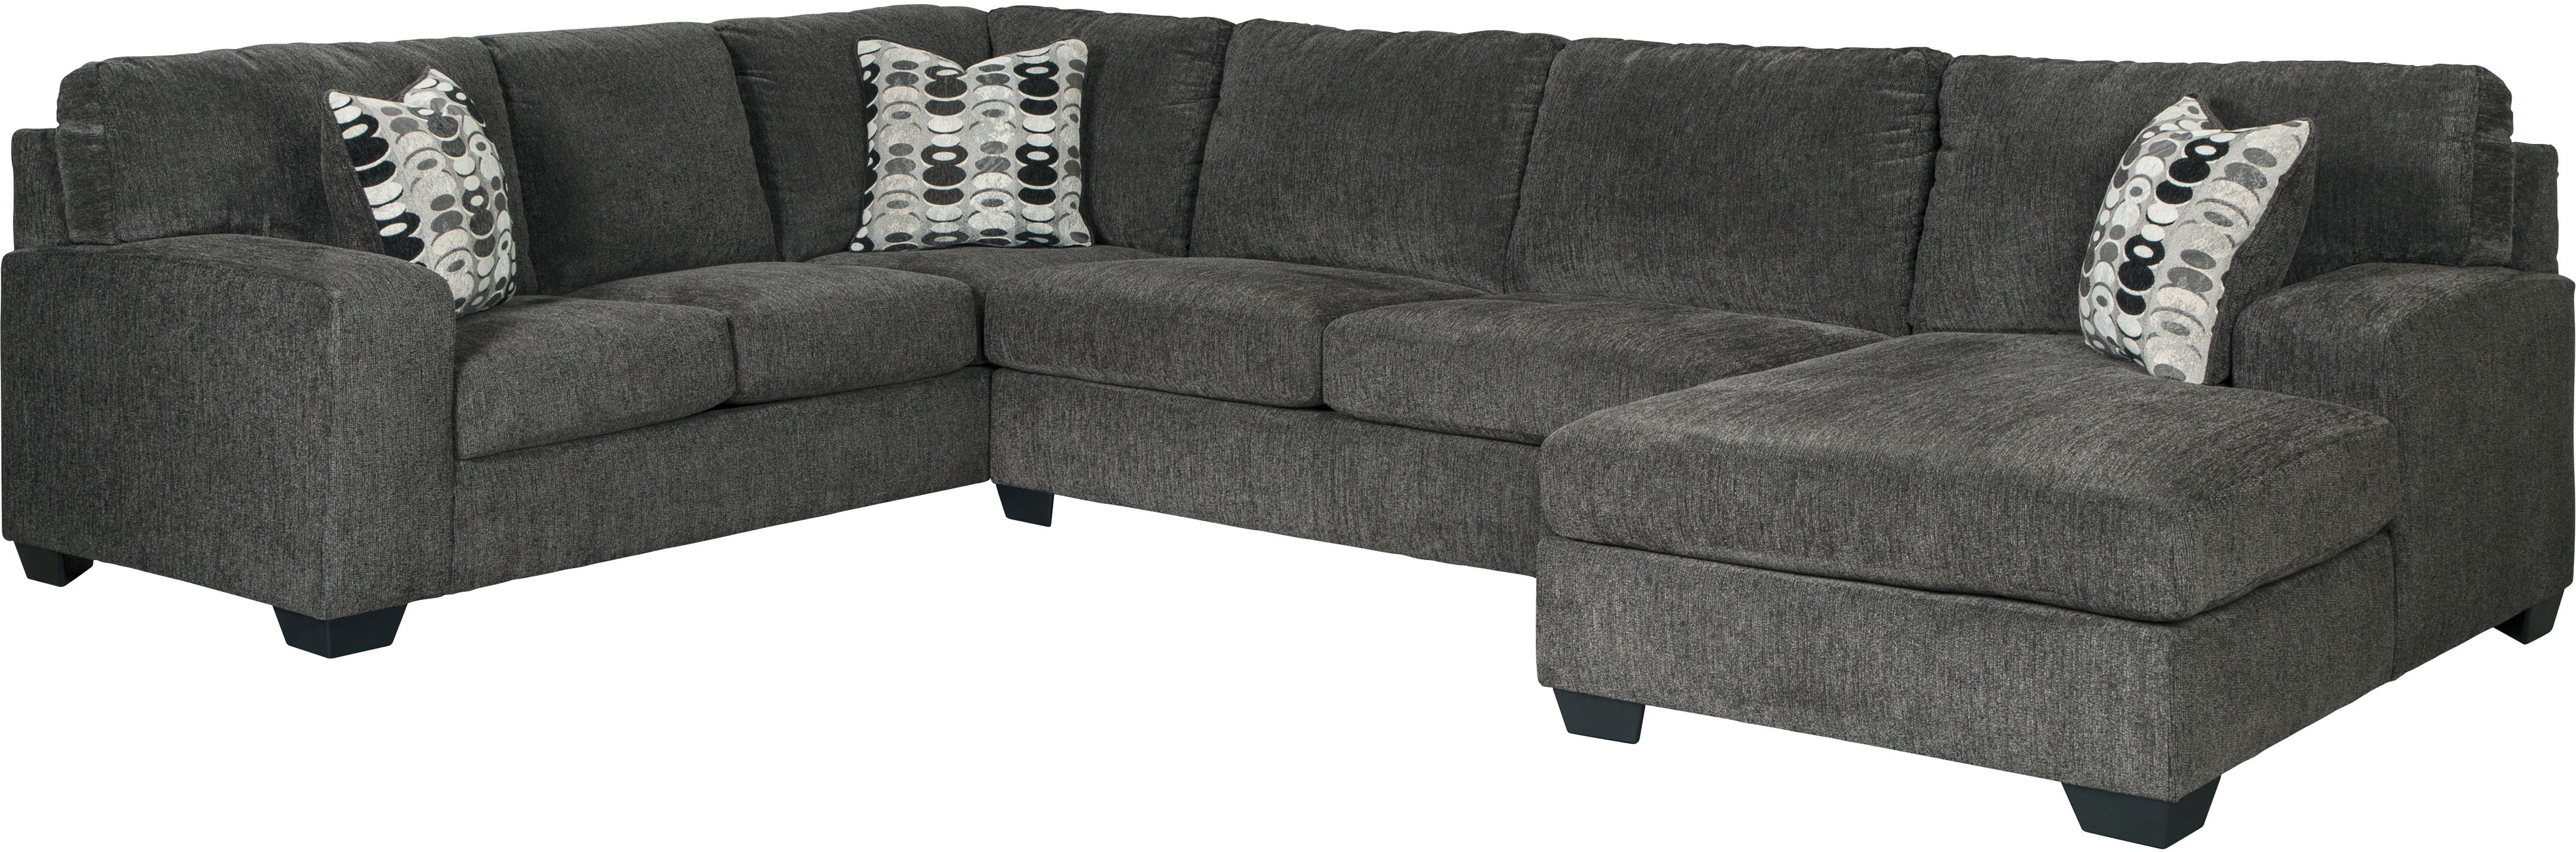 Gray sectional by Signature Design by Ashley